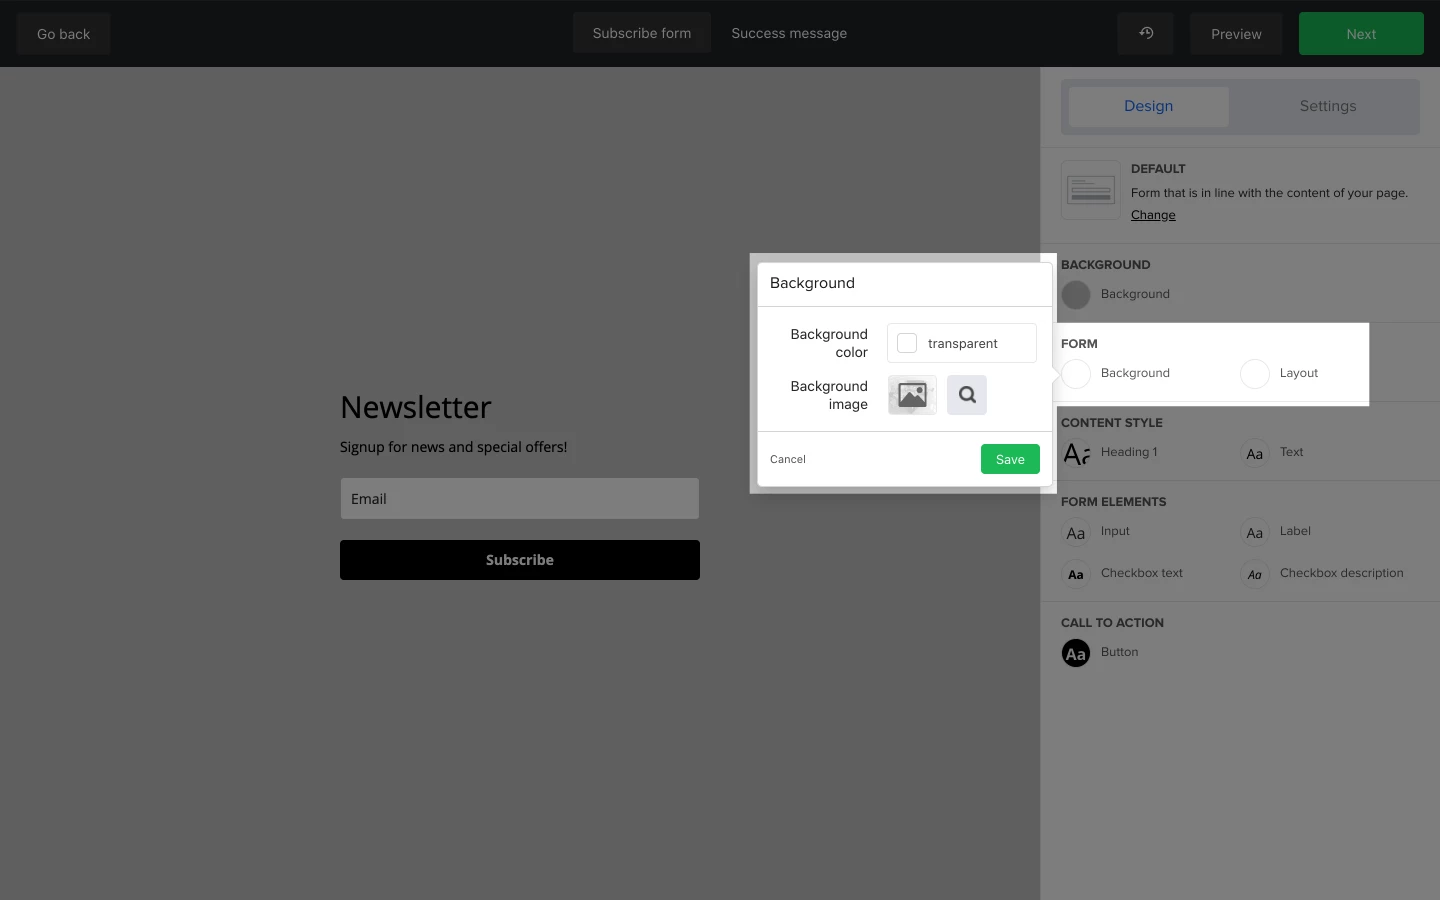 How To Create An Embedded Form - MailerLite